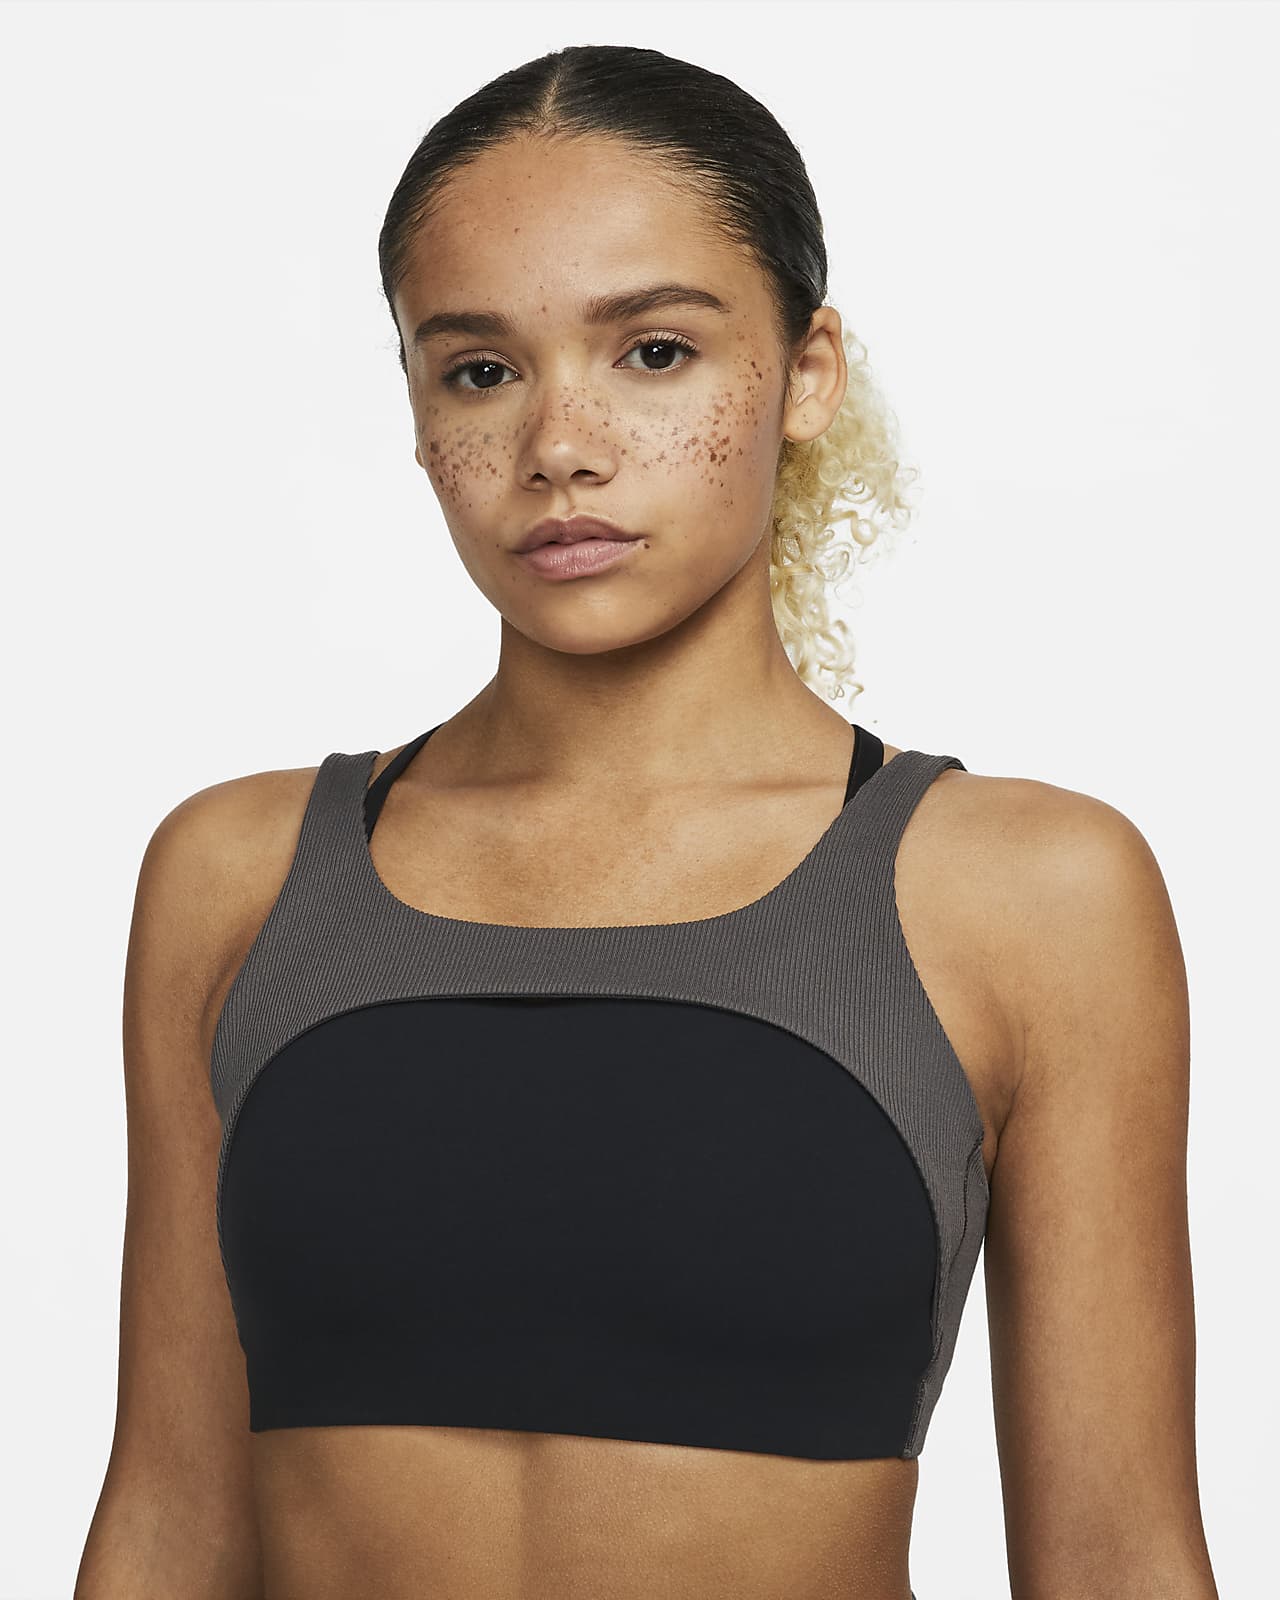 Nike Yoga Indy Women's Light-Support Lightly Lined Ribbed Sports Bra